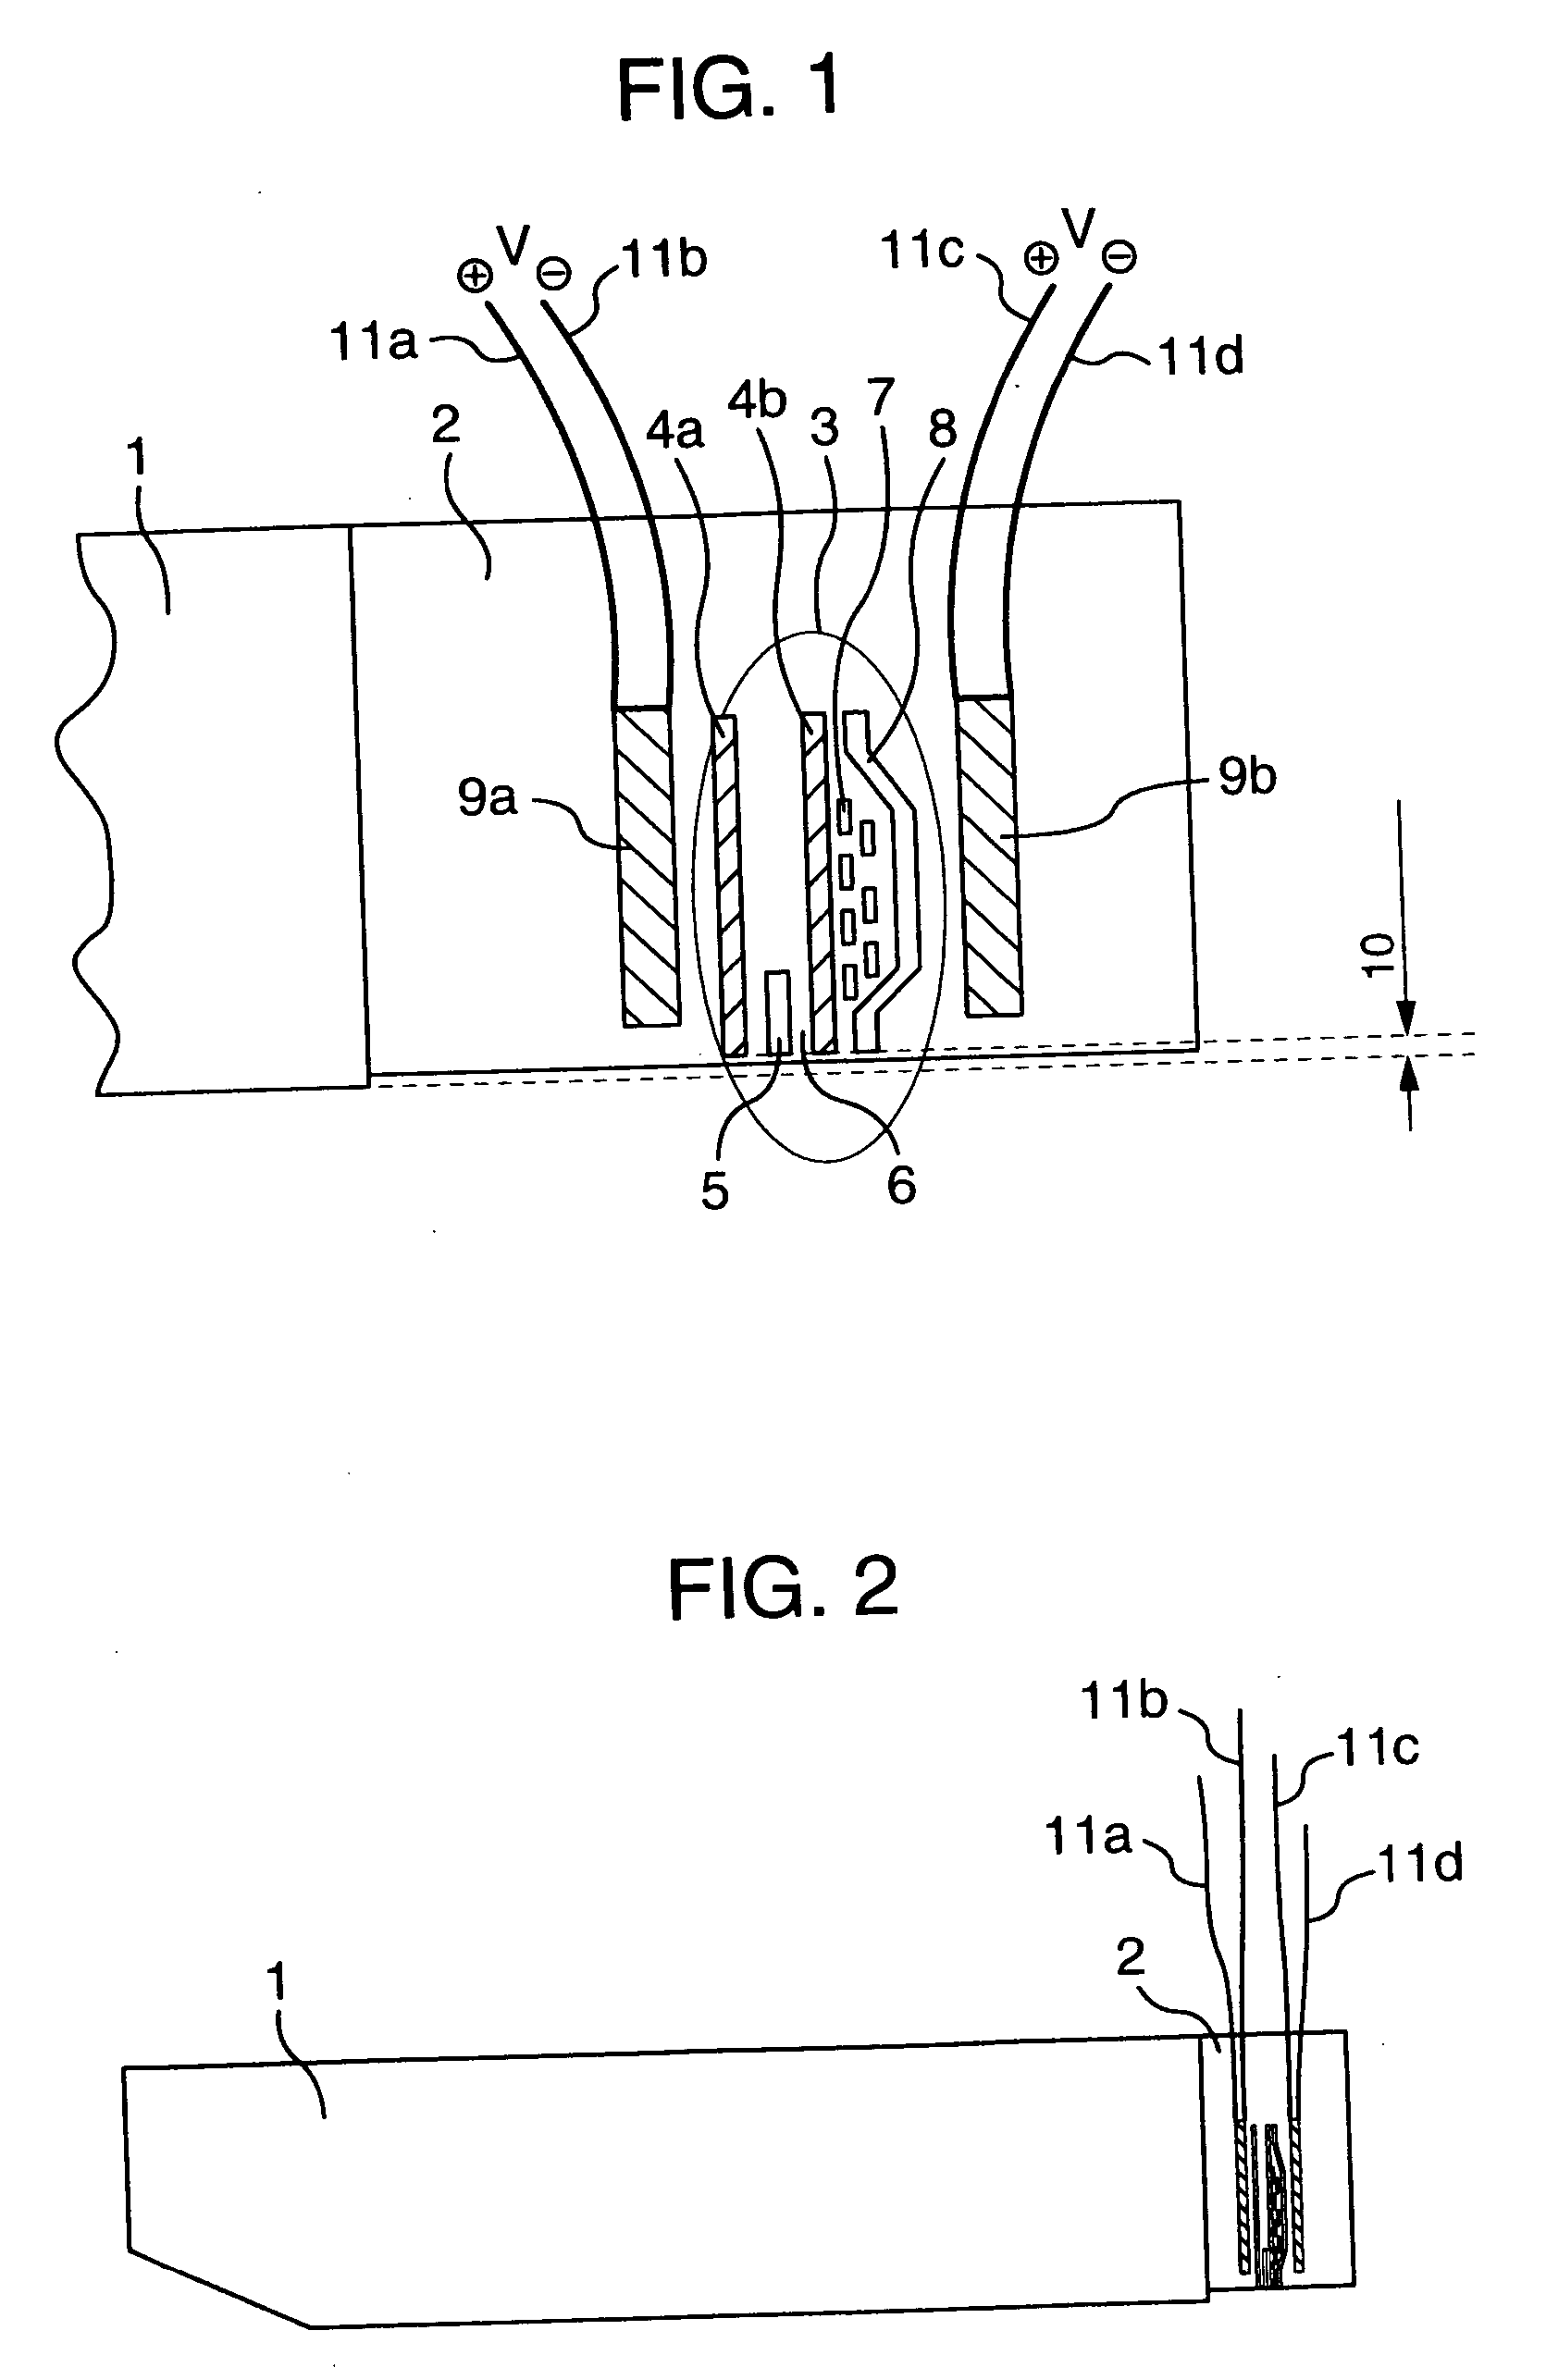 Magnetic head heating element in a disk drive